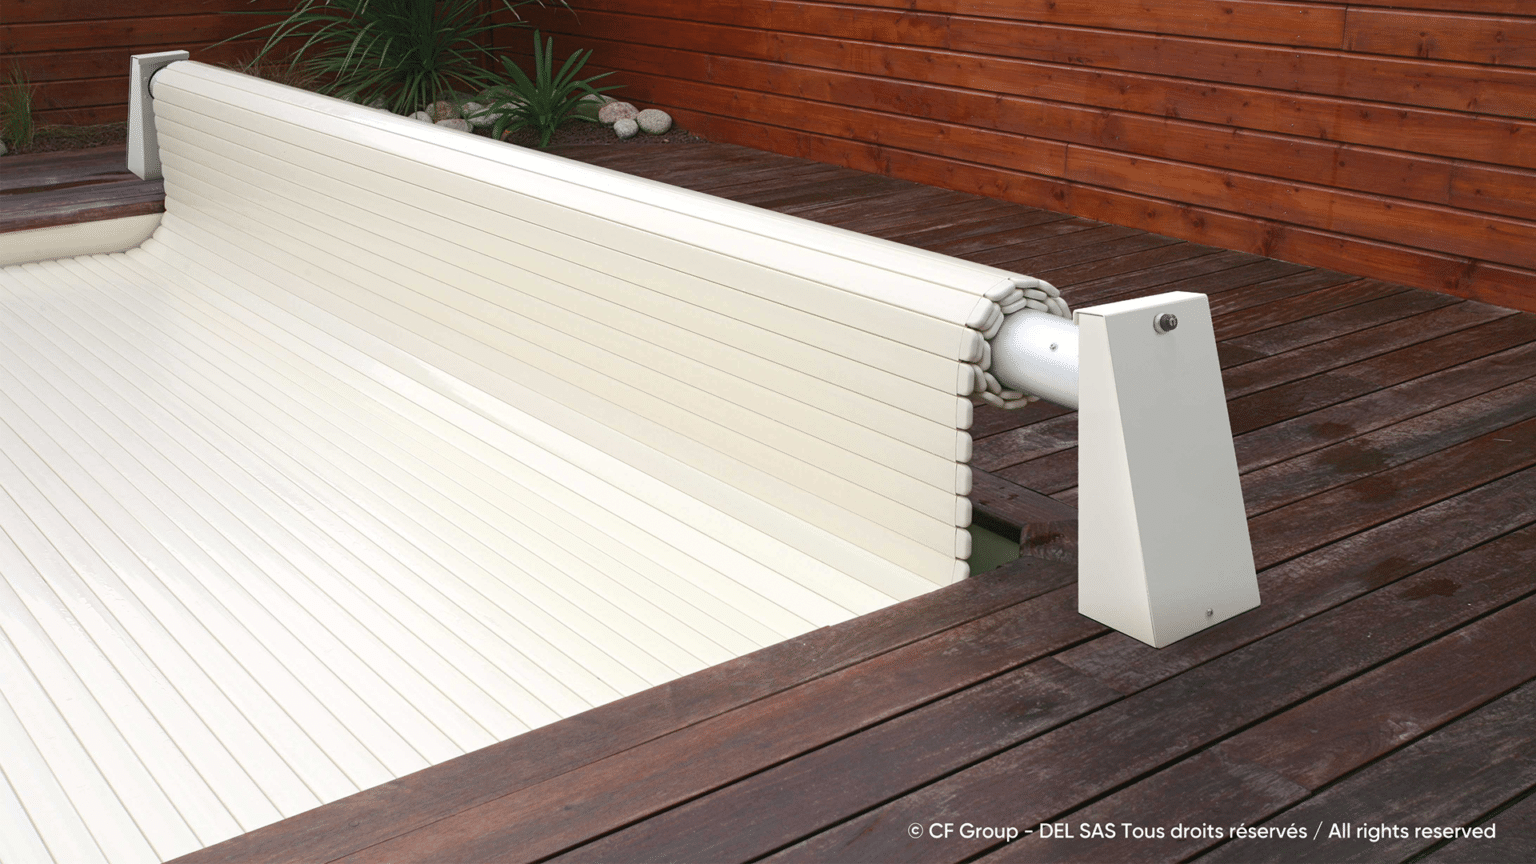 automatic slatted cover Pool DEL